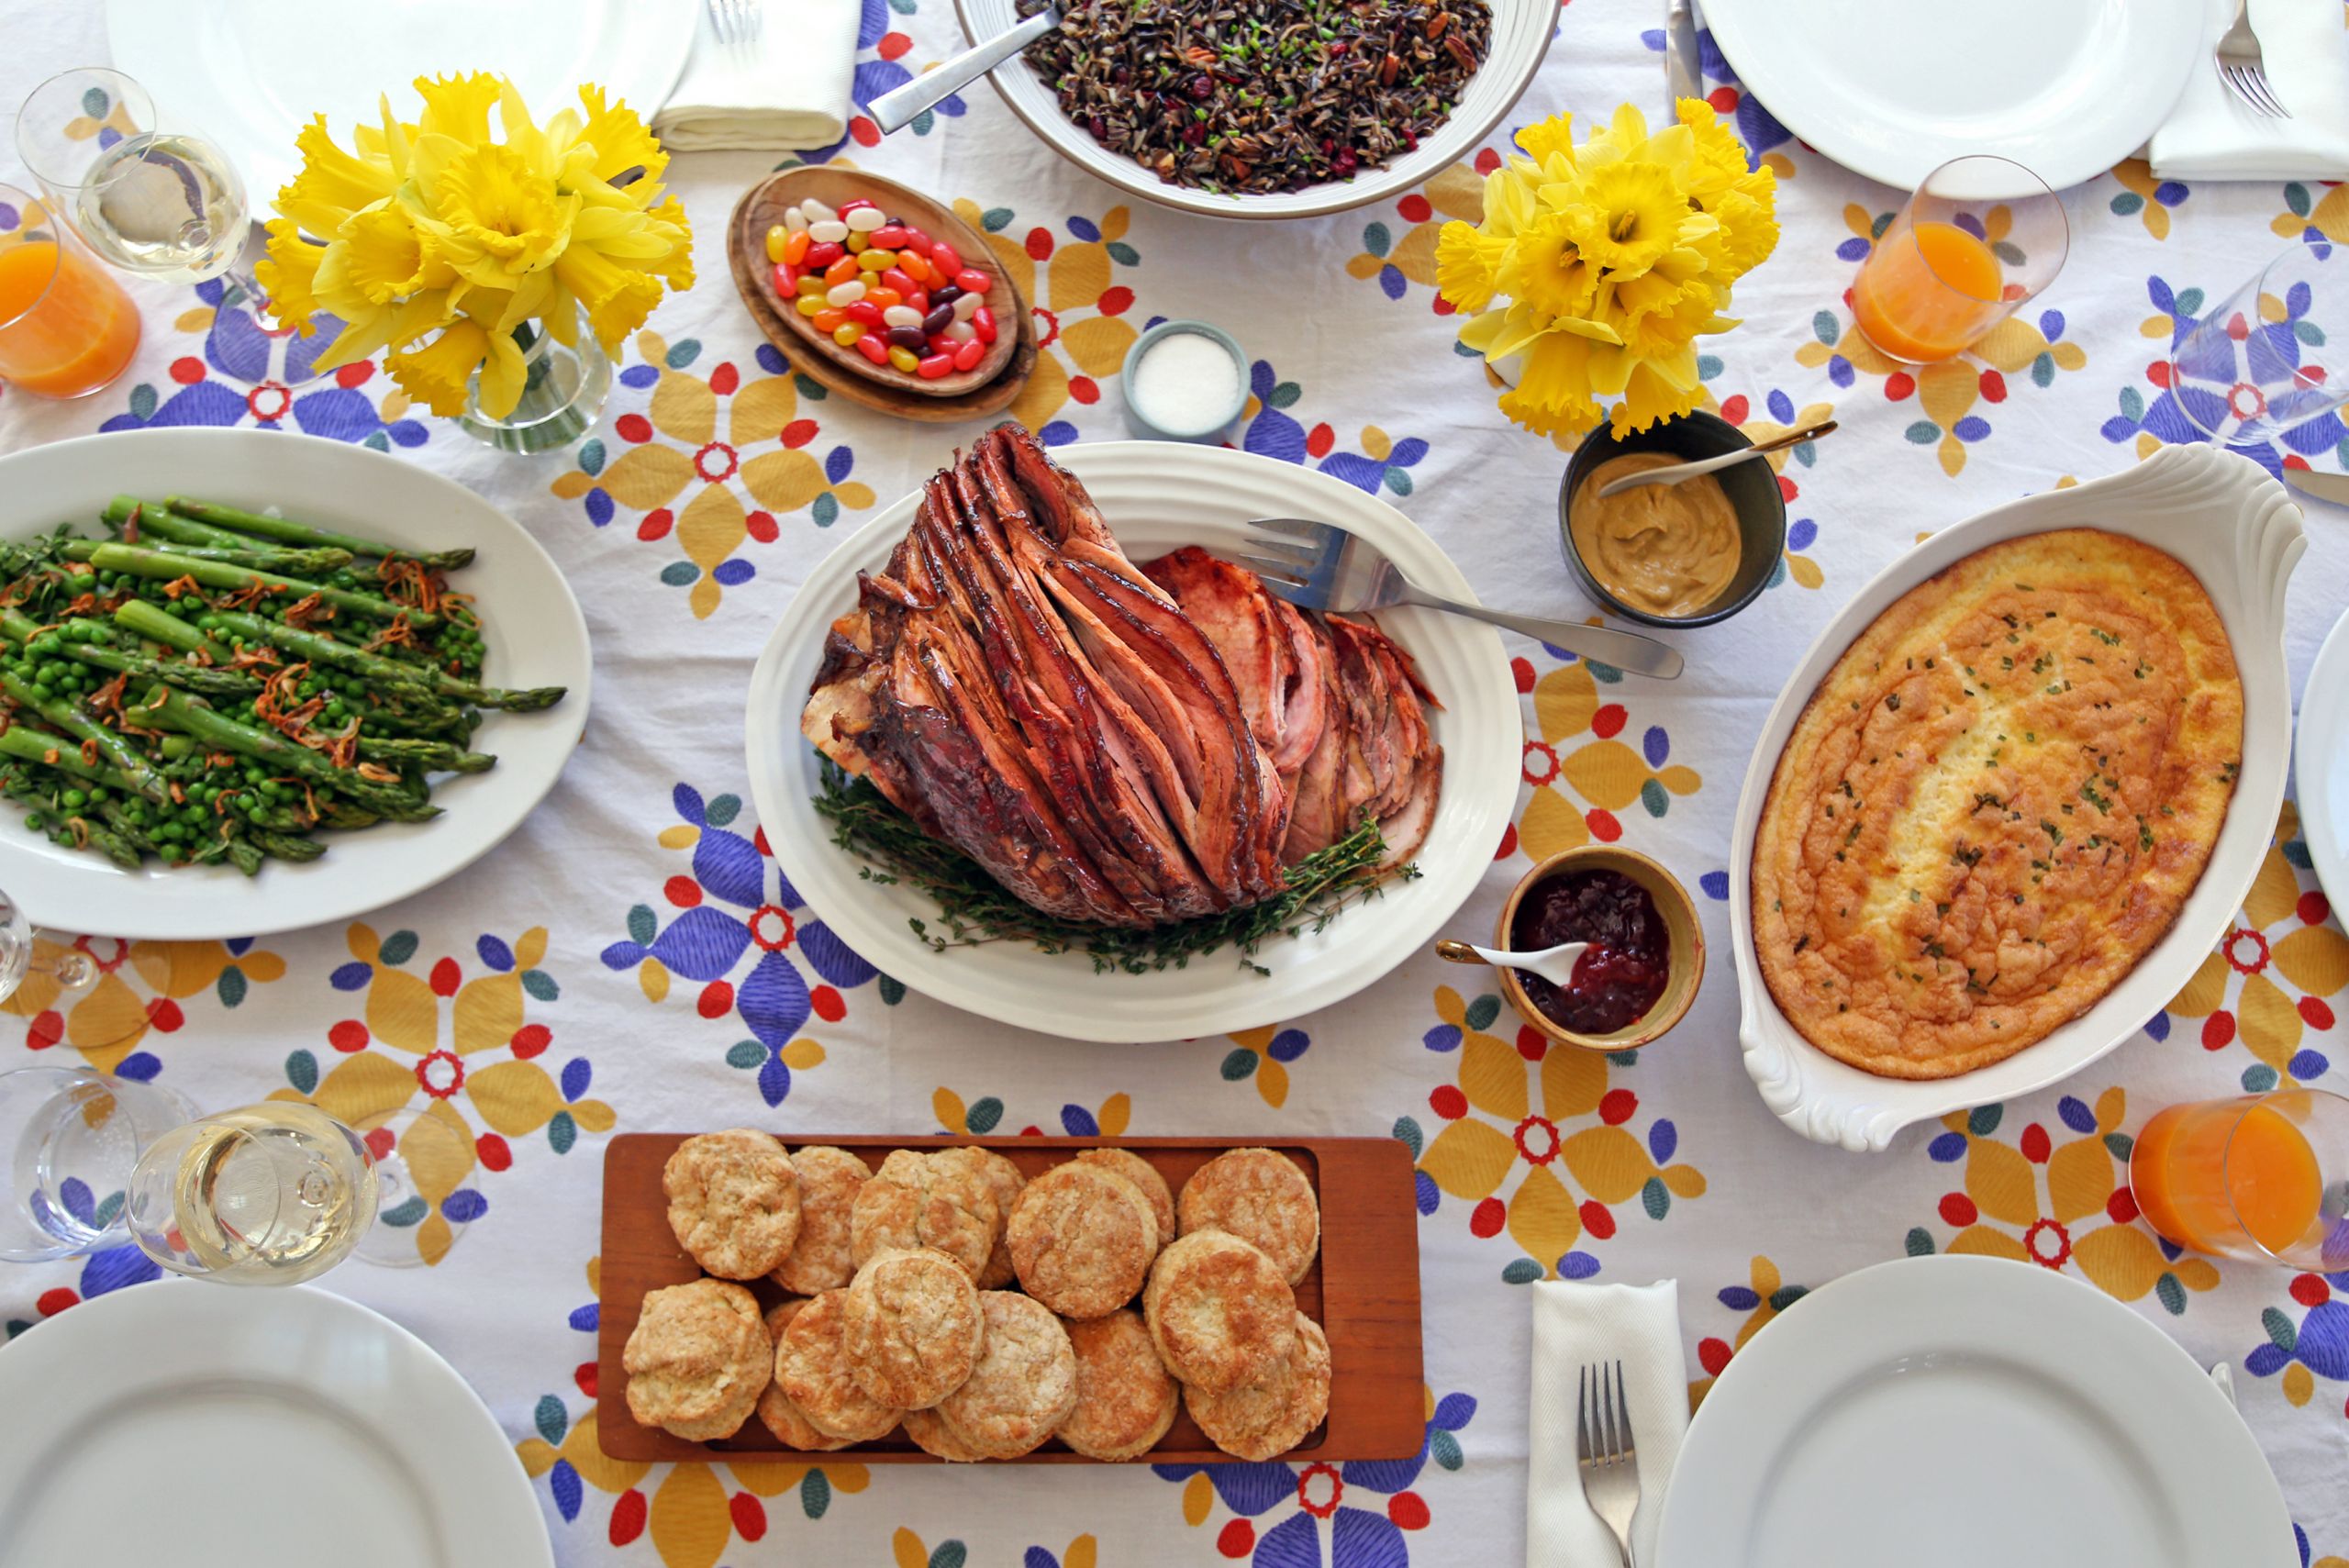 Easter Dinner Images
 Mix and Match Easter Brunch Dinner A Love Story